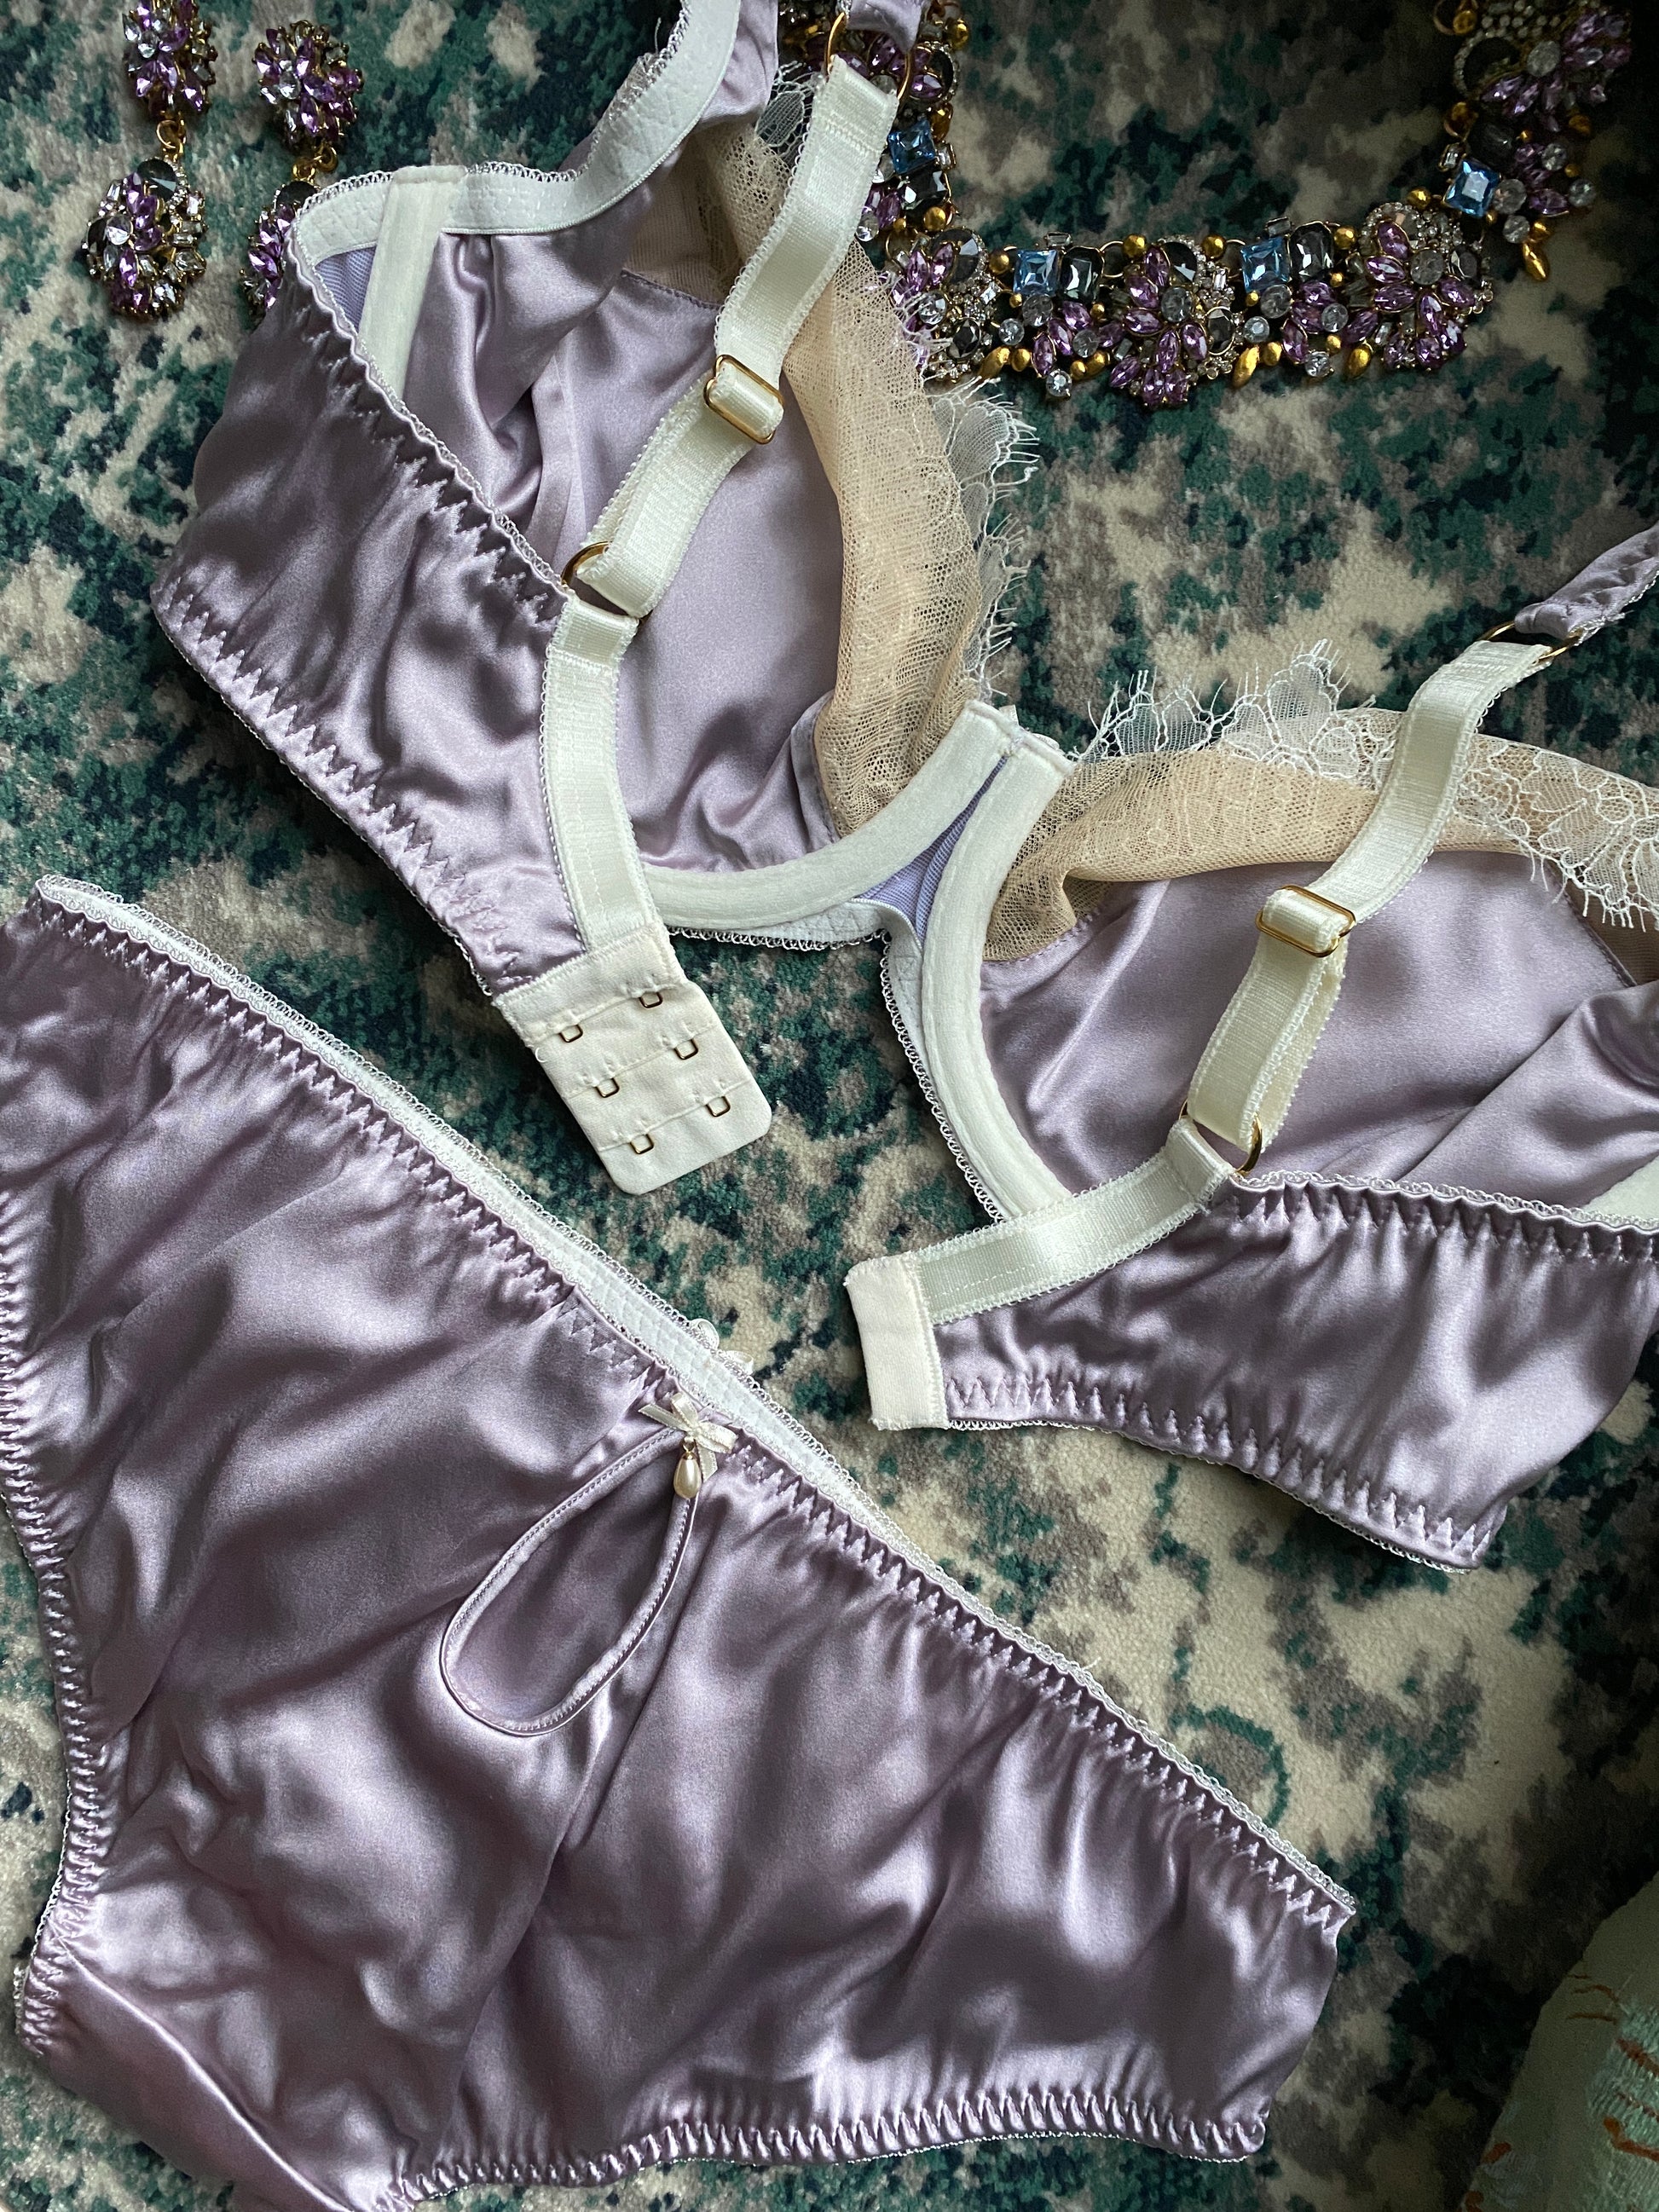 Customized Satin Bra, Gifts for Her, Bras, Handmade Lingerie, Sexy  Lingerie, Satin and Lace -  Canada